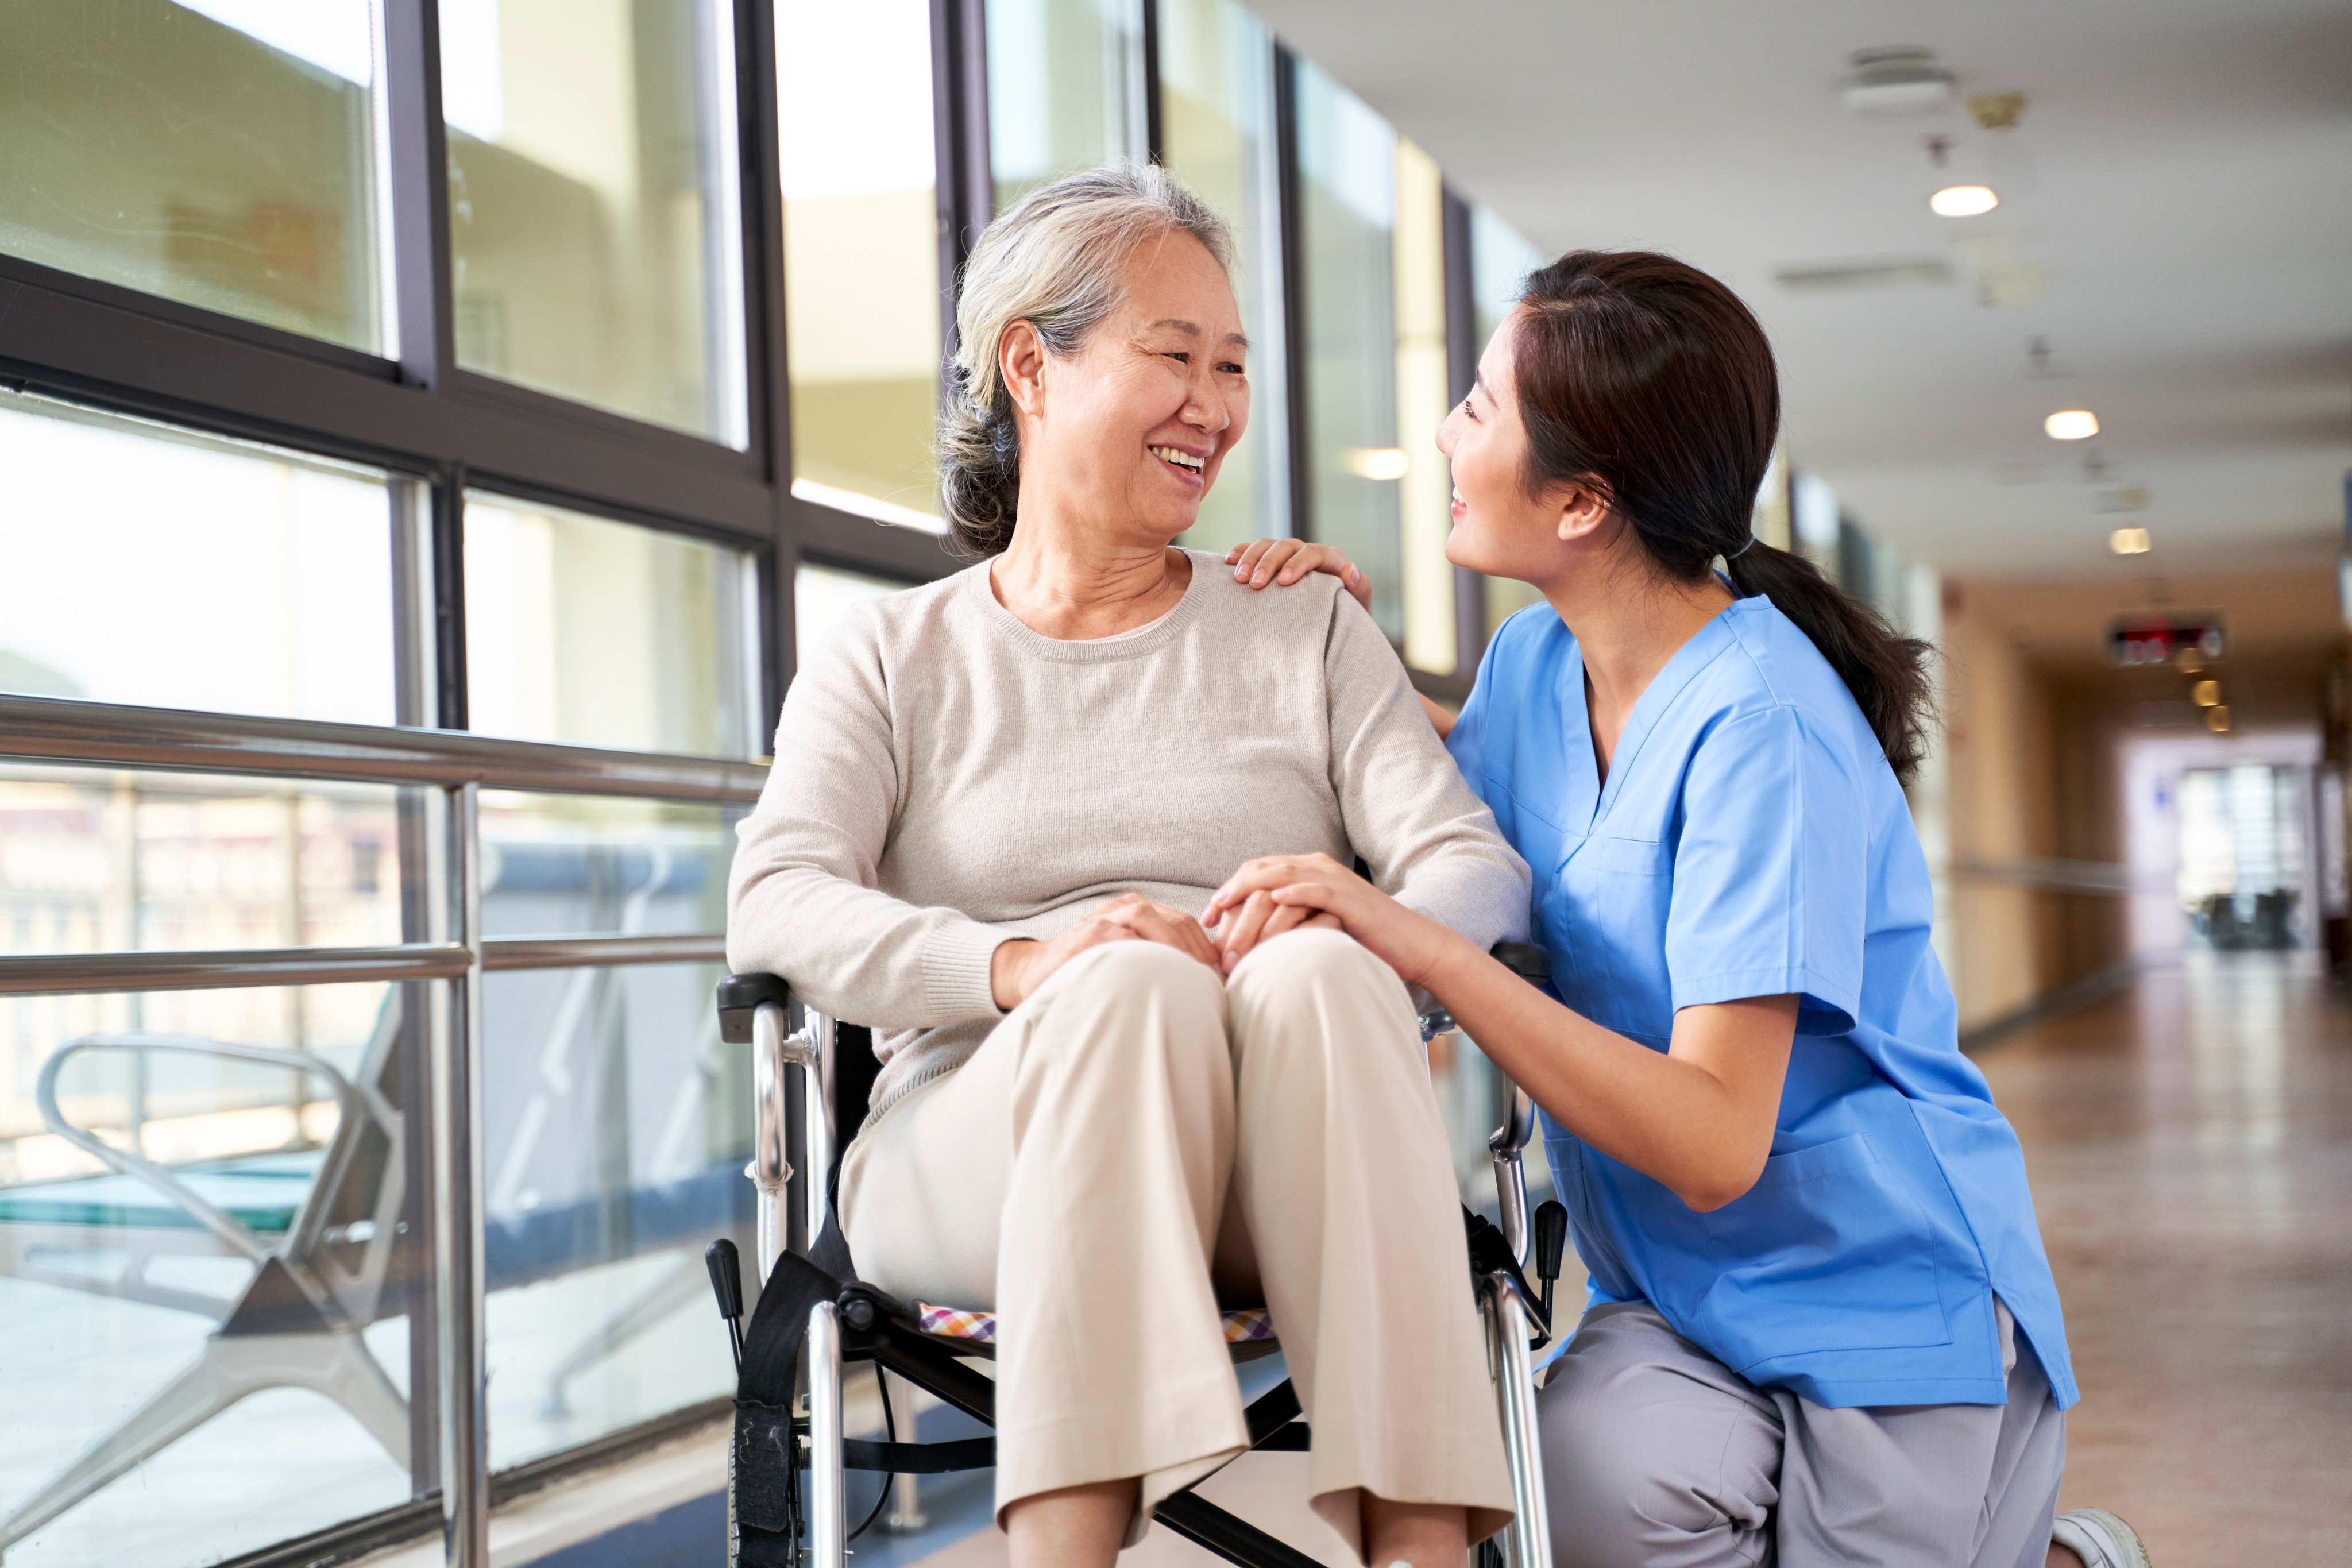 China is hoping to recruit more young, qualified workers for the senior care industry. Photo: Shutterstock